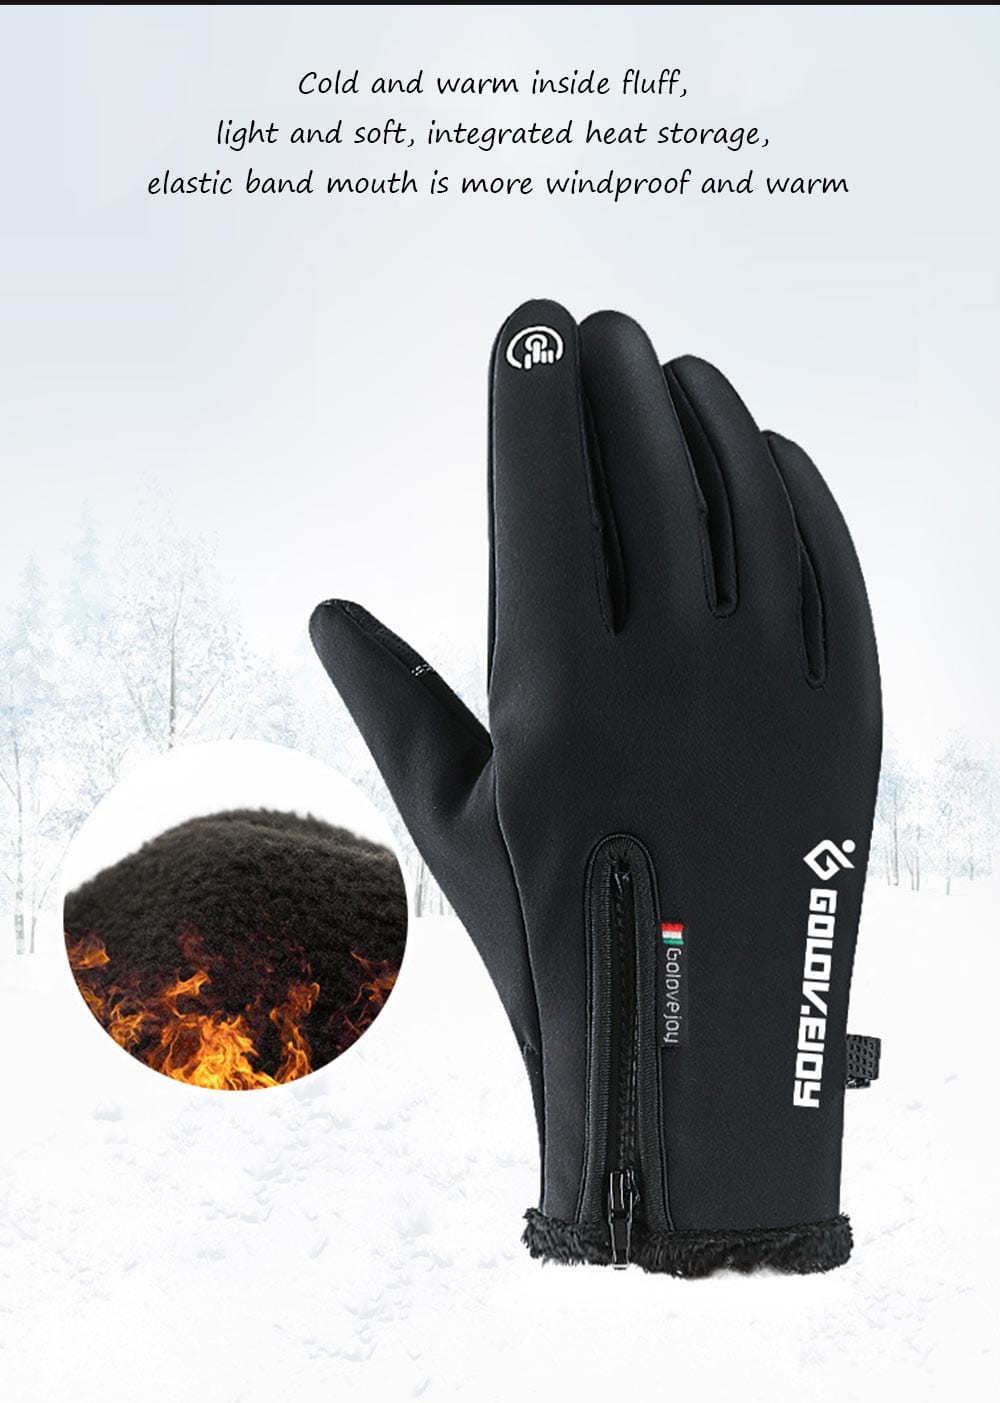 Outdoor Climbing Riding Screen Touching Gloves for Winter Use 2pcs- Gray S